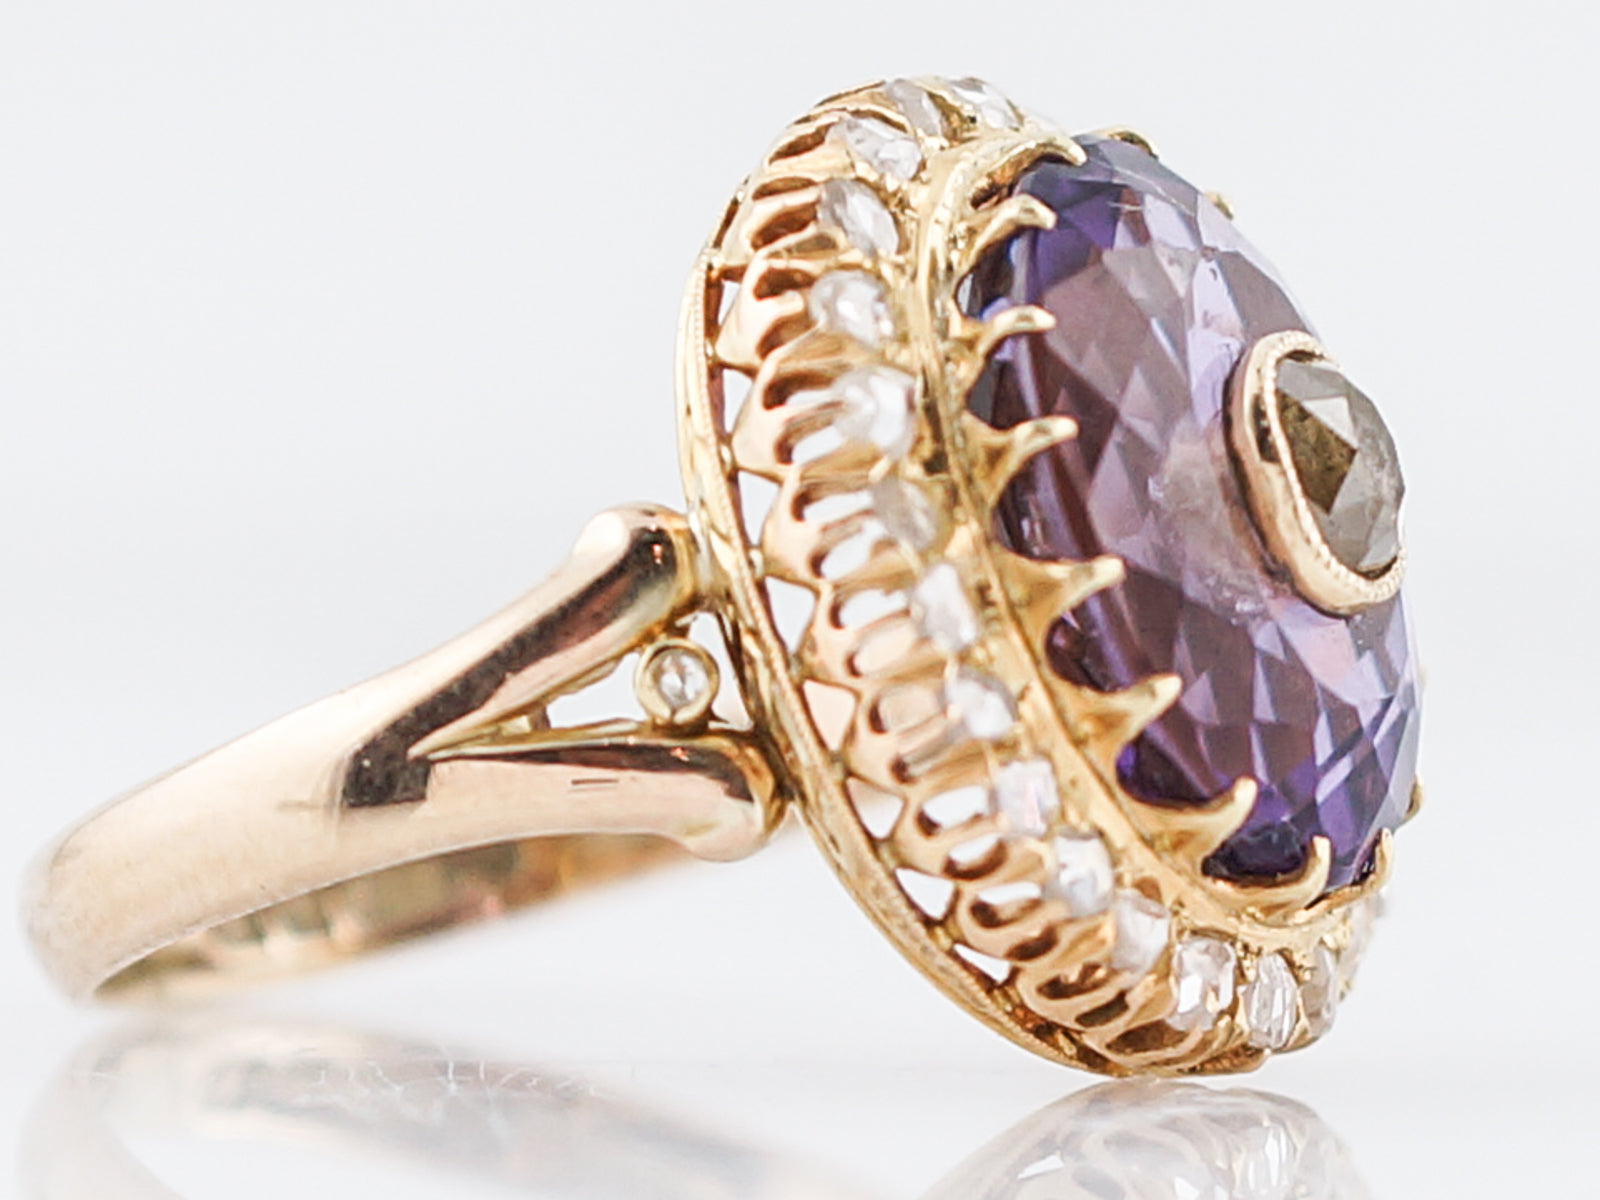 Antique Cocktail Ring Victorian 5.95 Oval Cut Amethyst in 9k Yellow Gold